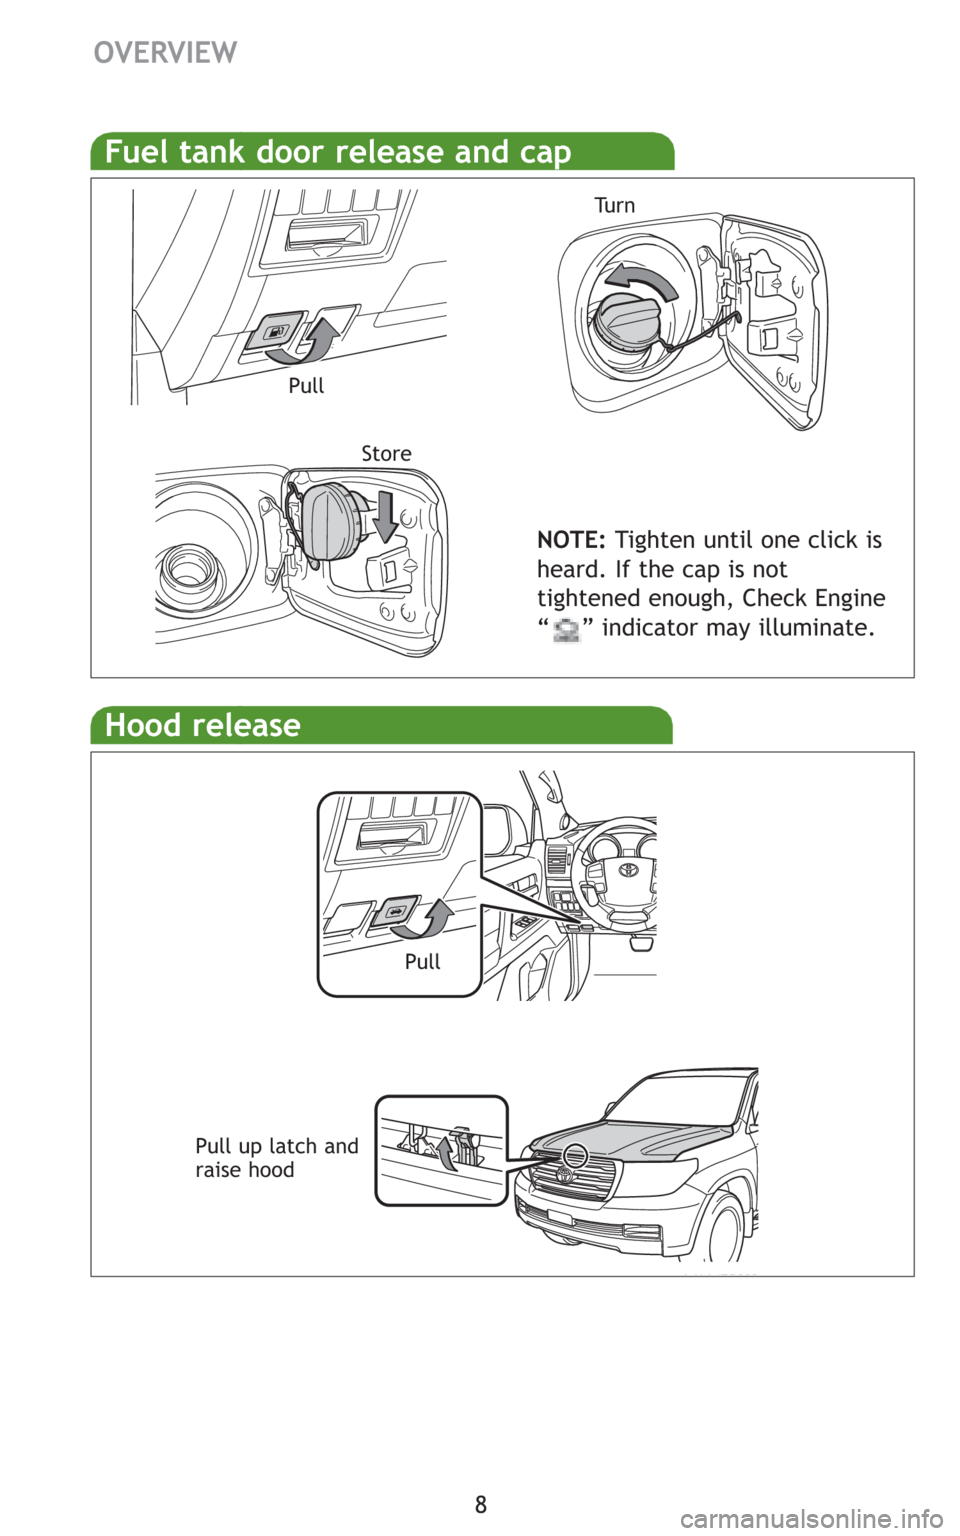 TOYOTA LAND CRUISER 2008 J200 Quick Reference Guide 8
Hood release
Pull up latch and
raise hood
Fuel tank door release and cap
NOTE:Tighten until one click is
heard. If the cap is not
tightened enough, Check Engine
“    ” indicator may illuminate.
